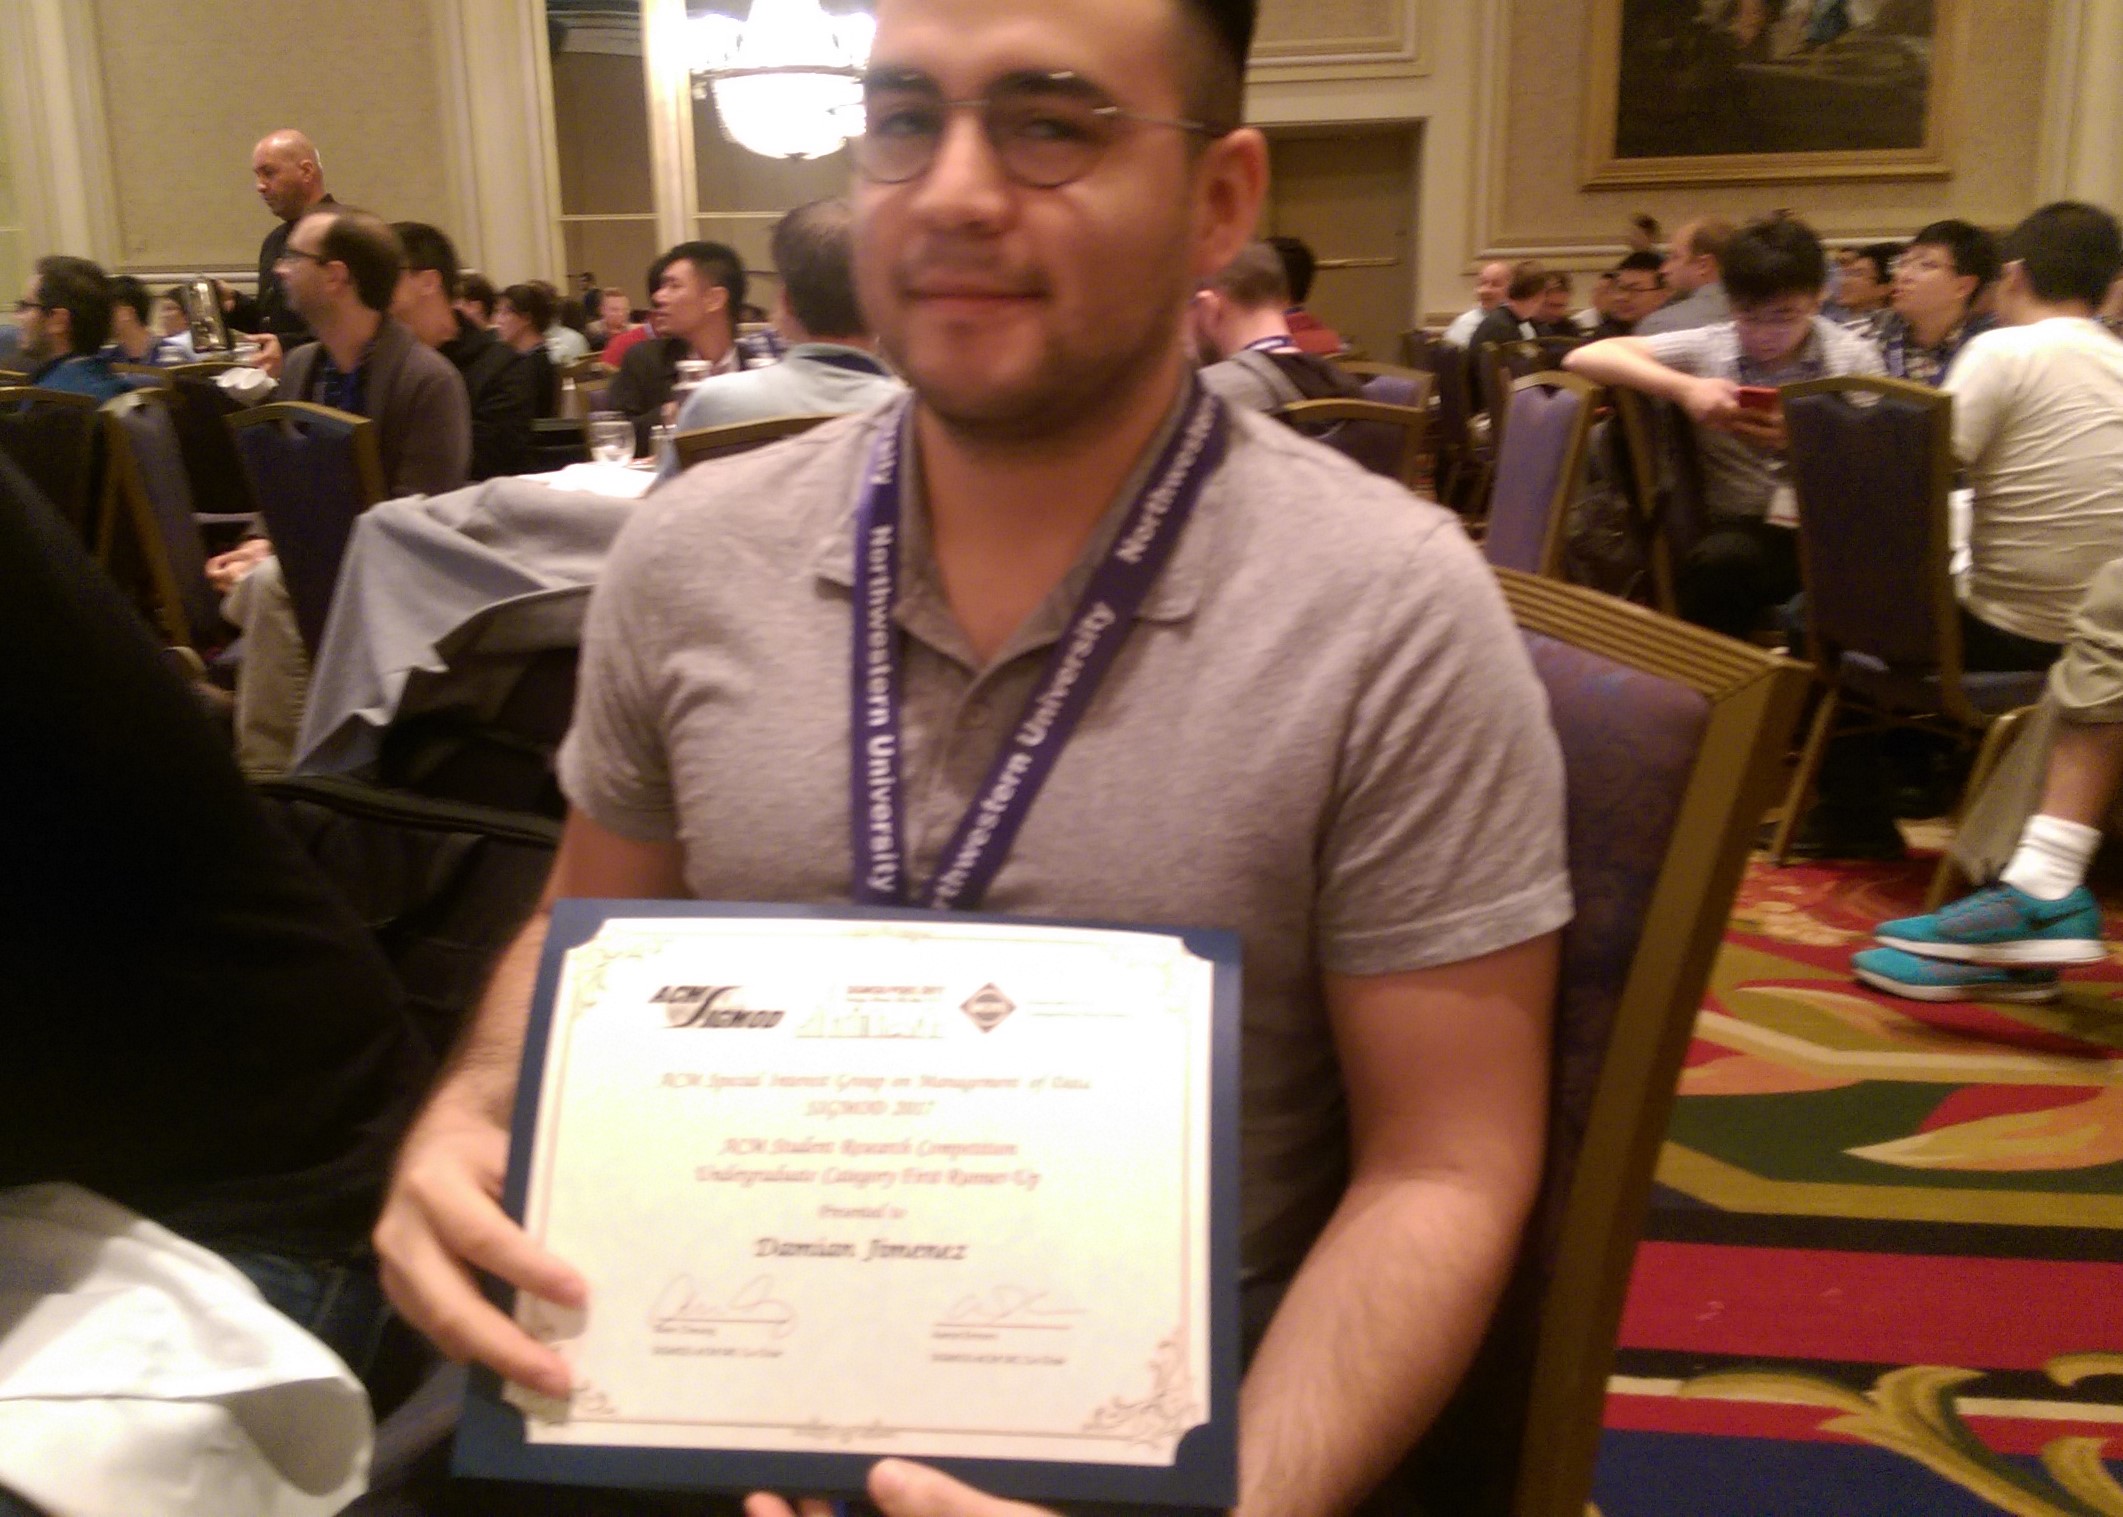 Damian receiving undergraduate research award at SIGMOD17 in Chicago